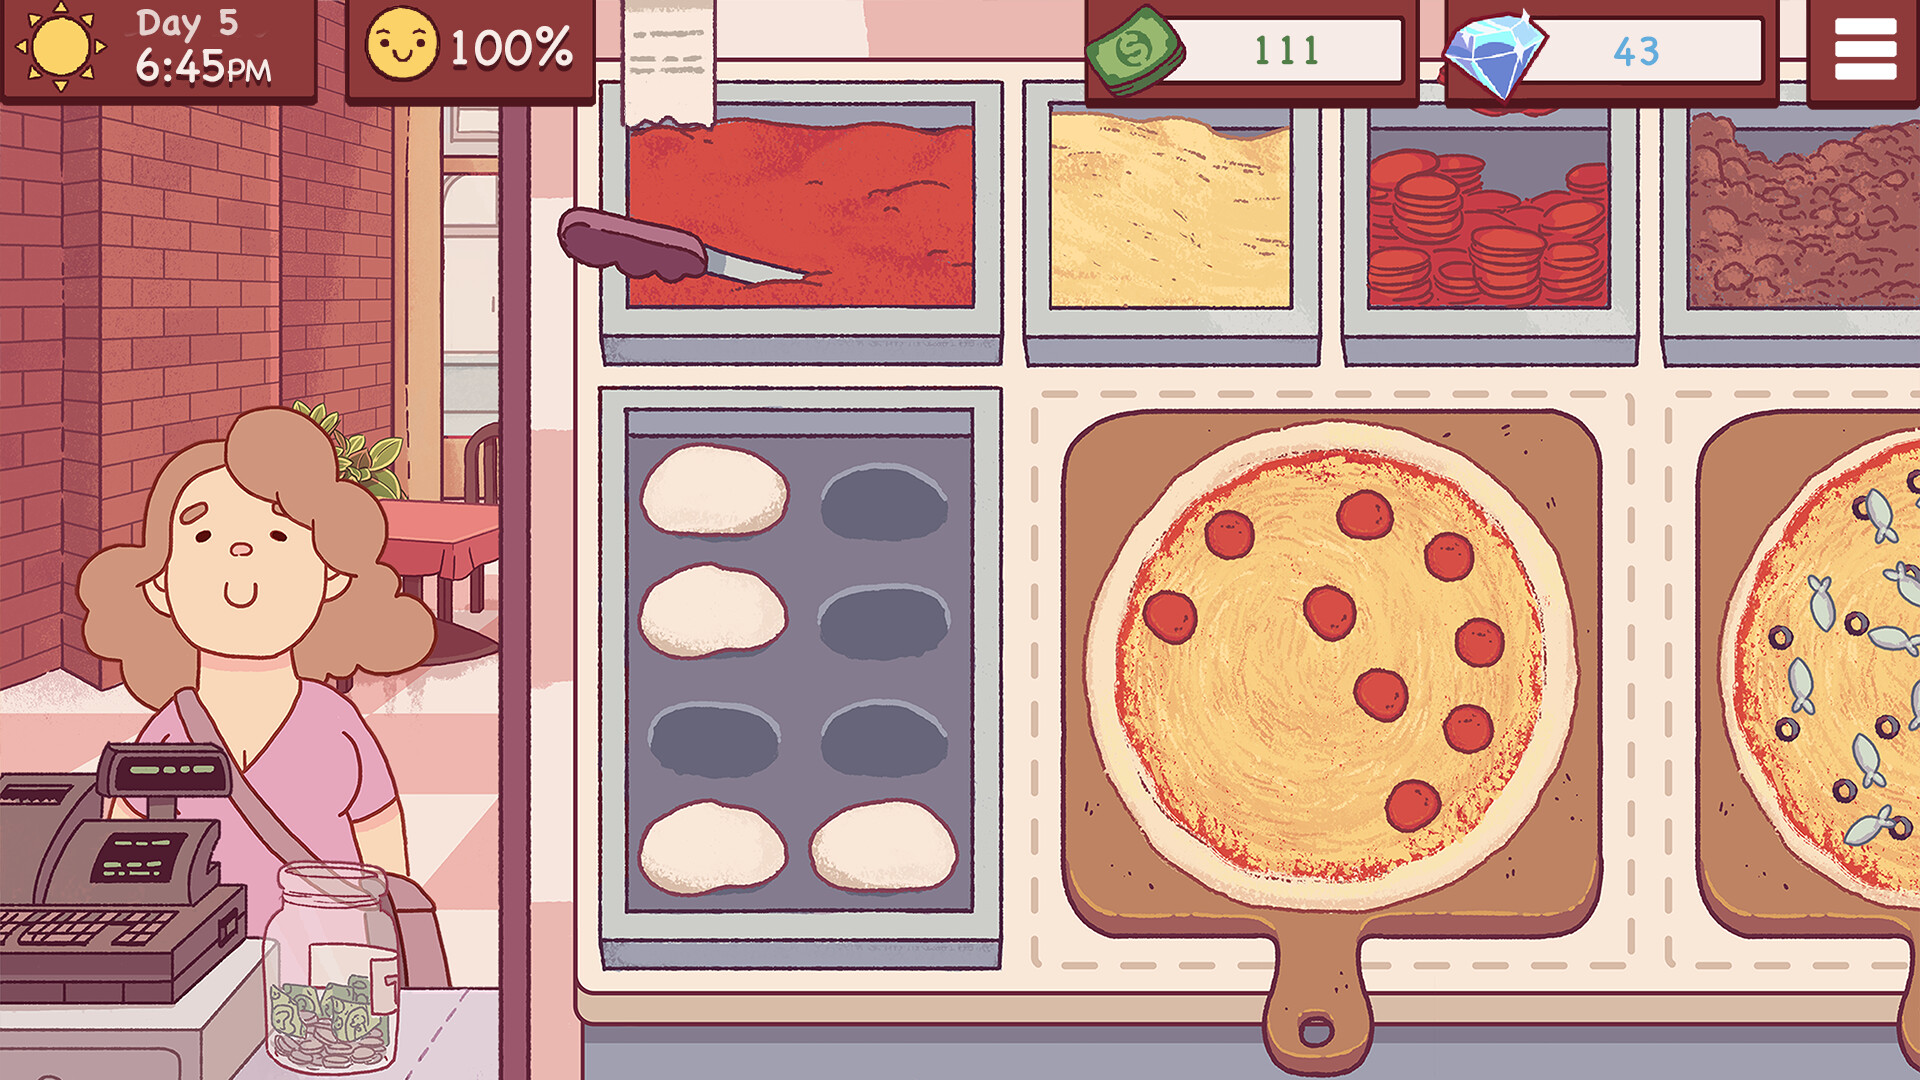 Find the best laptops for Good Pizza, Great Pizza - Cooking Simulator Game